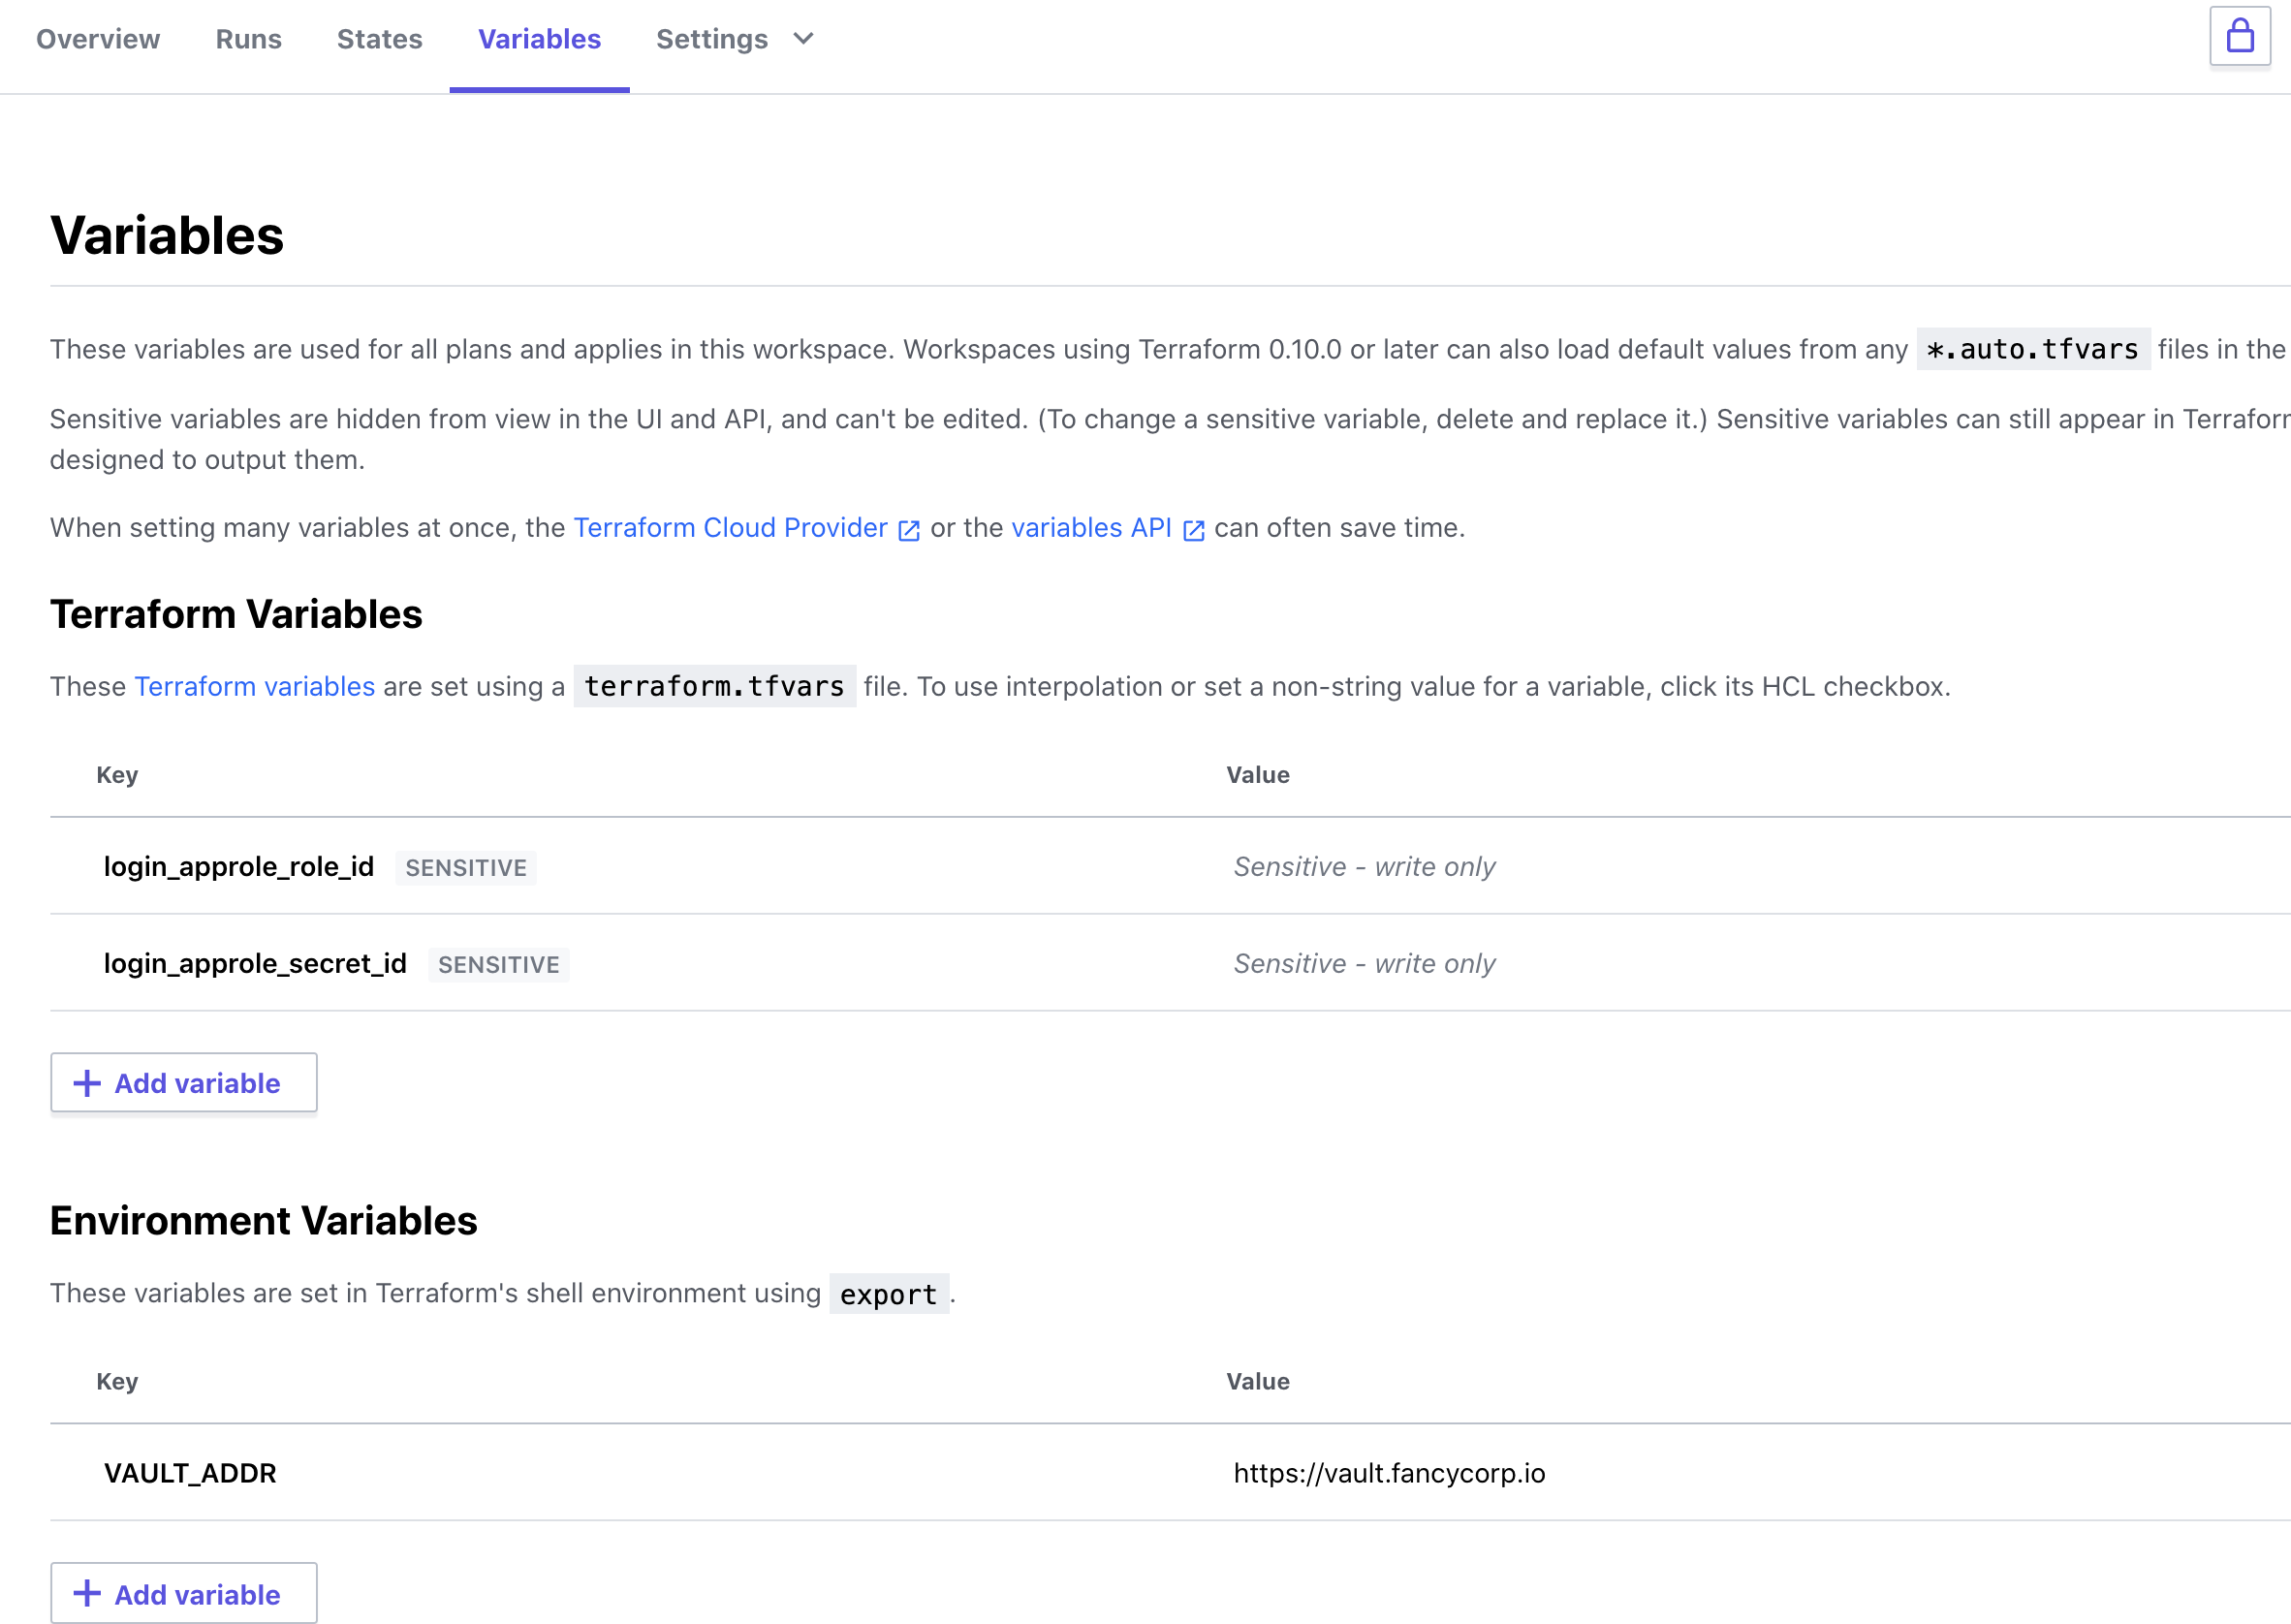 Terraform Cloud, Variables page. Two Terraform variables defined: login_approle_role_id and login_approle_secret_id. One environment variable set: VAULT_ADDR=https://vault.fancycorp.io